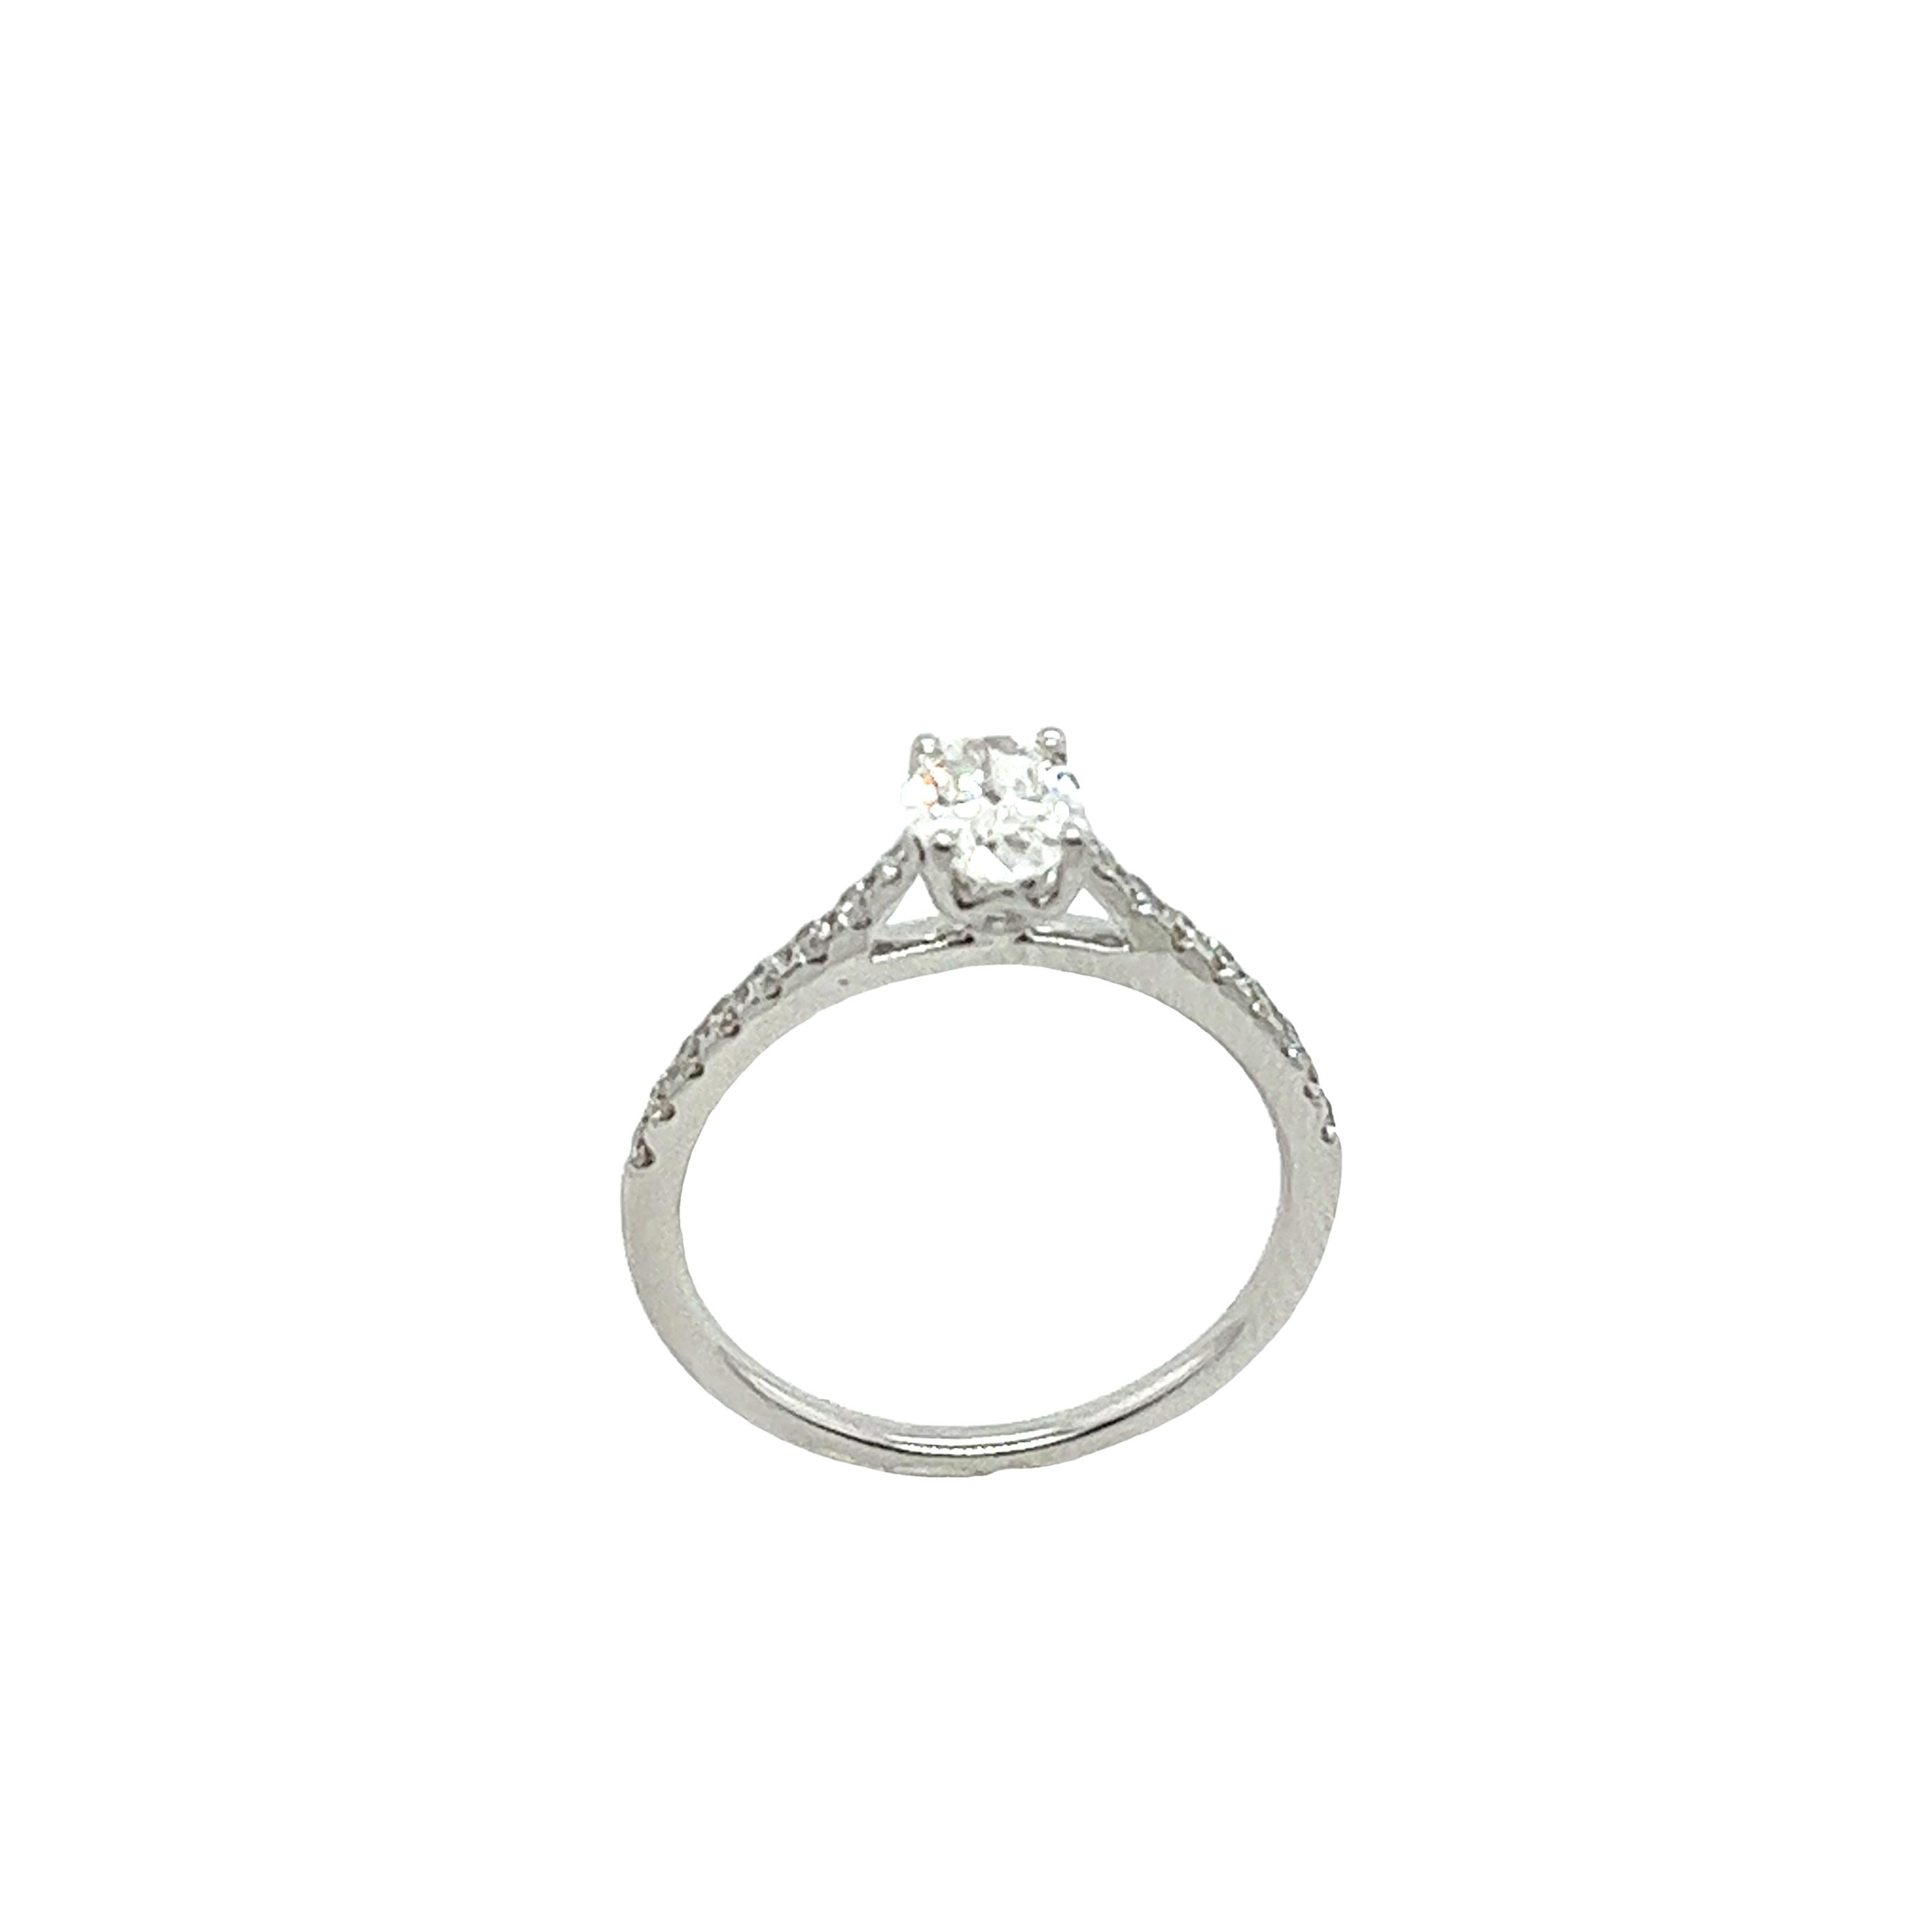 An elegant diamond ring for your engagement, set with 0.51ct oval cut natural diamond main stone
in 9ct white gold claw setting, and 16 diamonds on shoulders, 0.25ct .
Total Diamond Weight: 0.51ct & 0.25ct
Diamond Colour: G
Diamond Clarity: